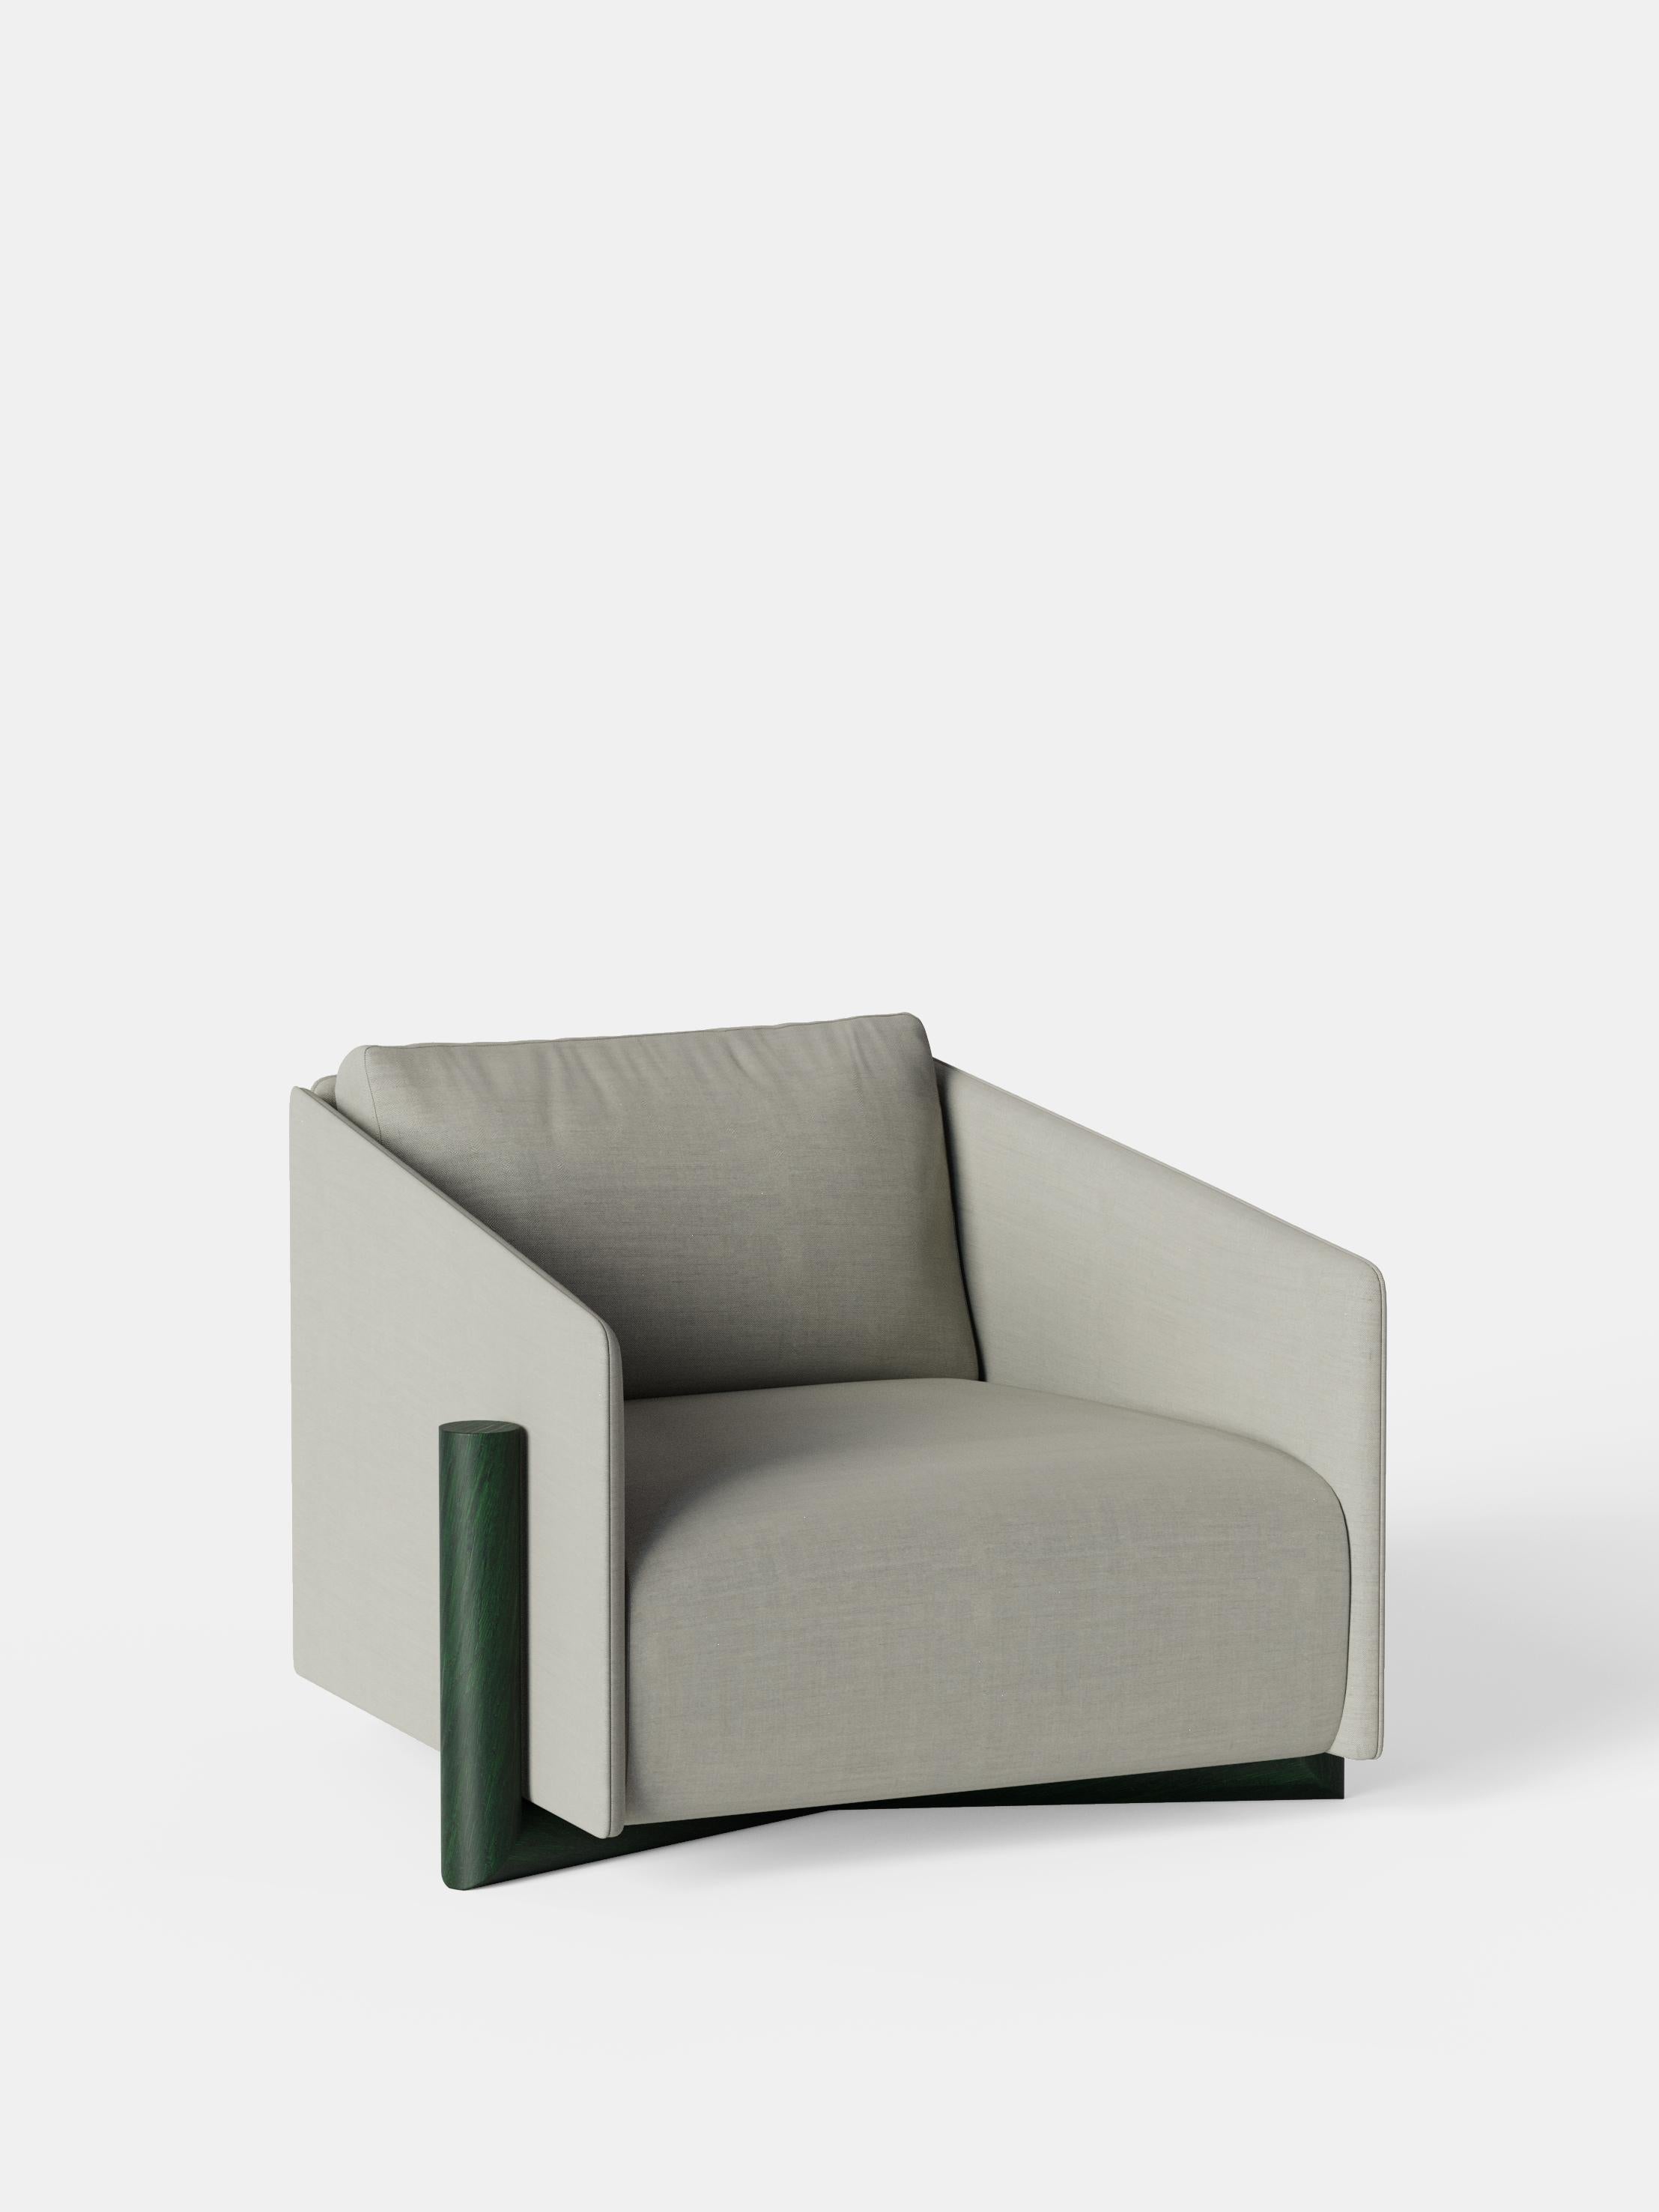 Set of 2 Grey Timber Armchair by Kann Design
Dimensions: D 104.5 x W 93 x H 75 cm.
Materials: Solid green oak base, wood frame, elastic belts, HR foam, fabric upholstery Kvadrat Remix 126 (90% wool, 10% nylon).
Available in other fabrics.

The